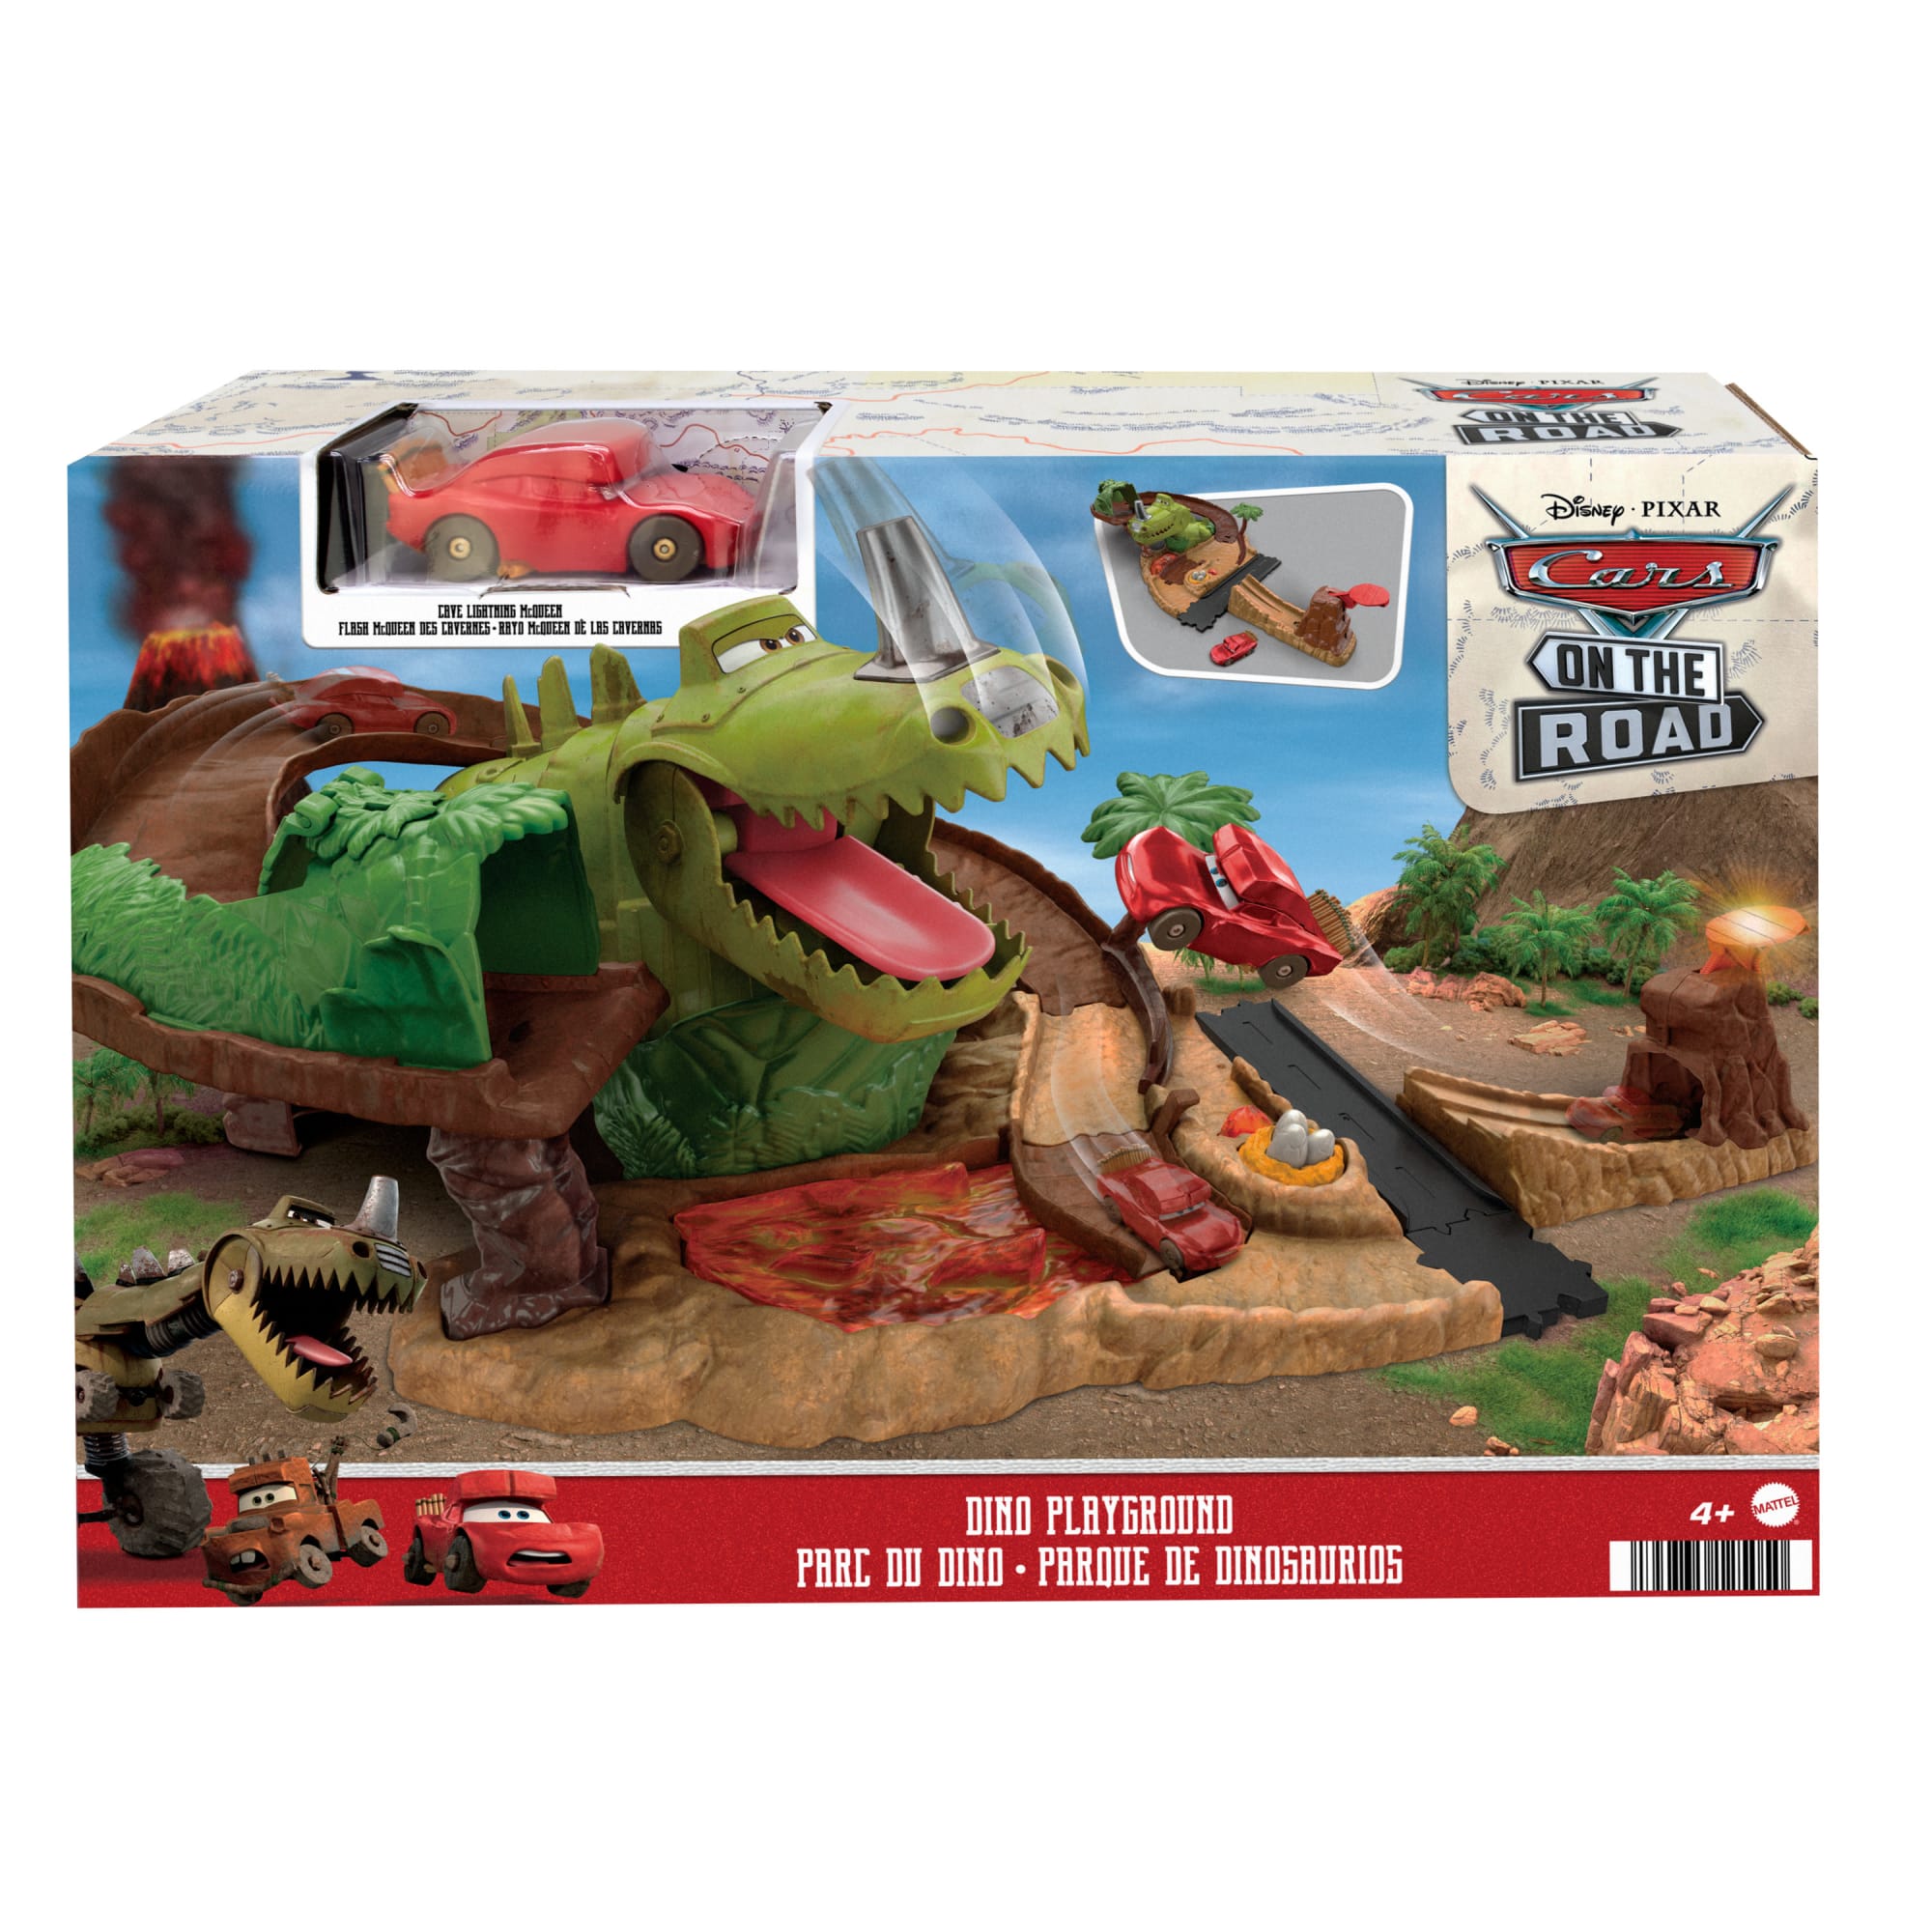 Race to check out Dino Playground playset inspired by Disney and Pixar's  Cars On The Road with Cave Lightning McQueen. Find more Cars toys at Shop. Mattel.com.